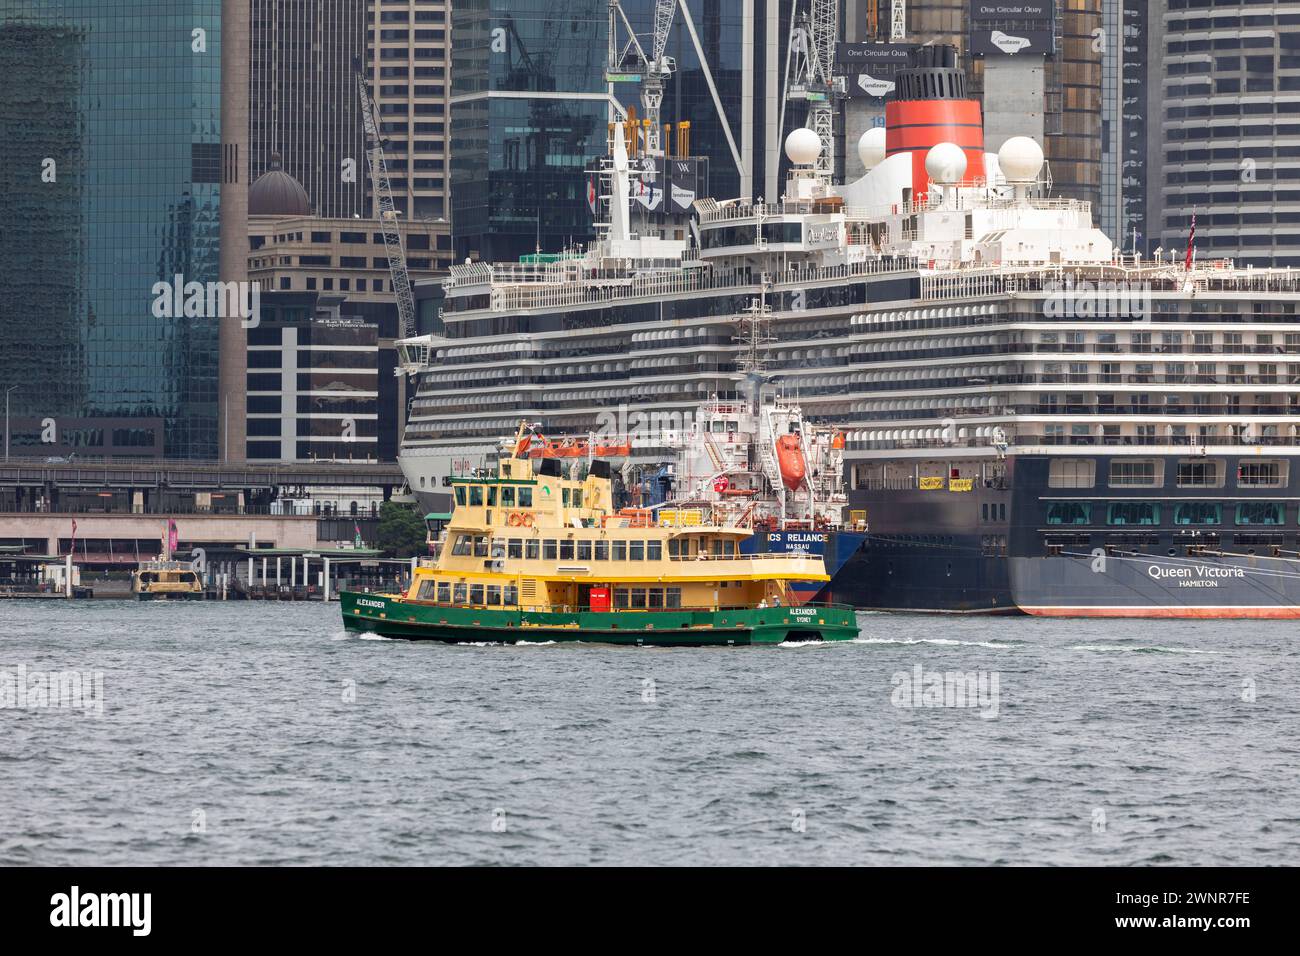 Sydney harbour, Cruise ship Queen Victoria, ferry MV Alexander and ICS Reliance fuel tanker in the harbour, Sydney,NSW,Australia,2024 Stock Photo